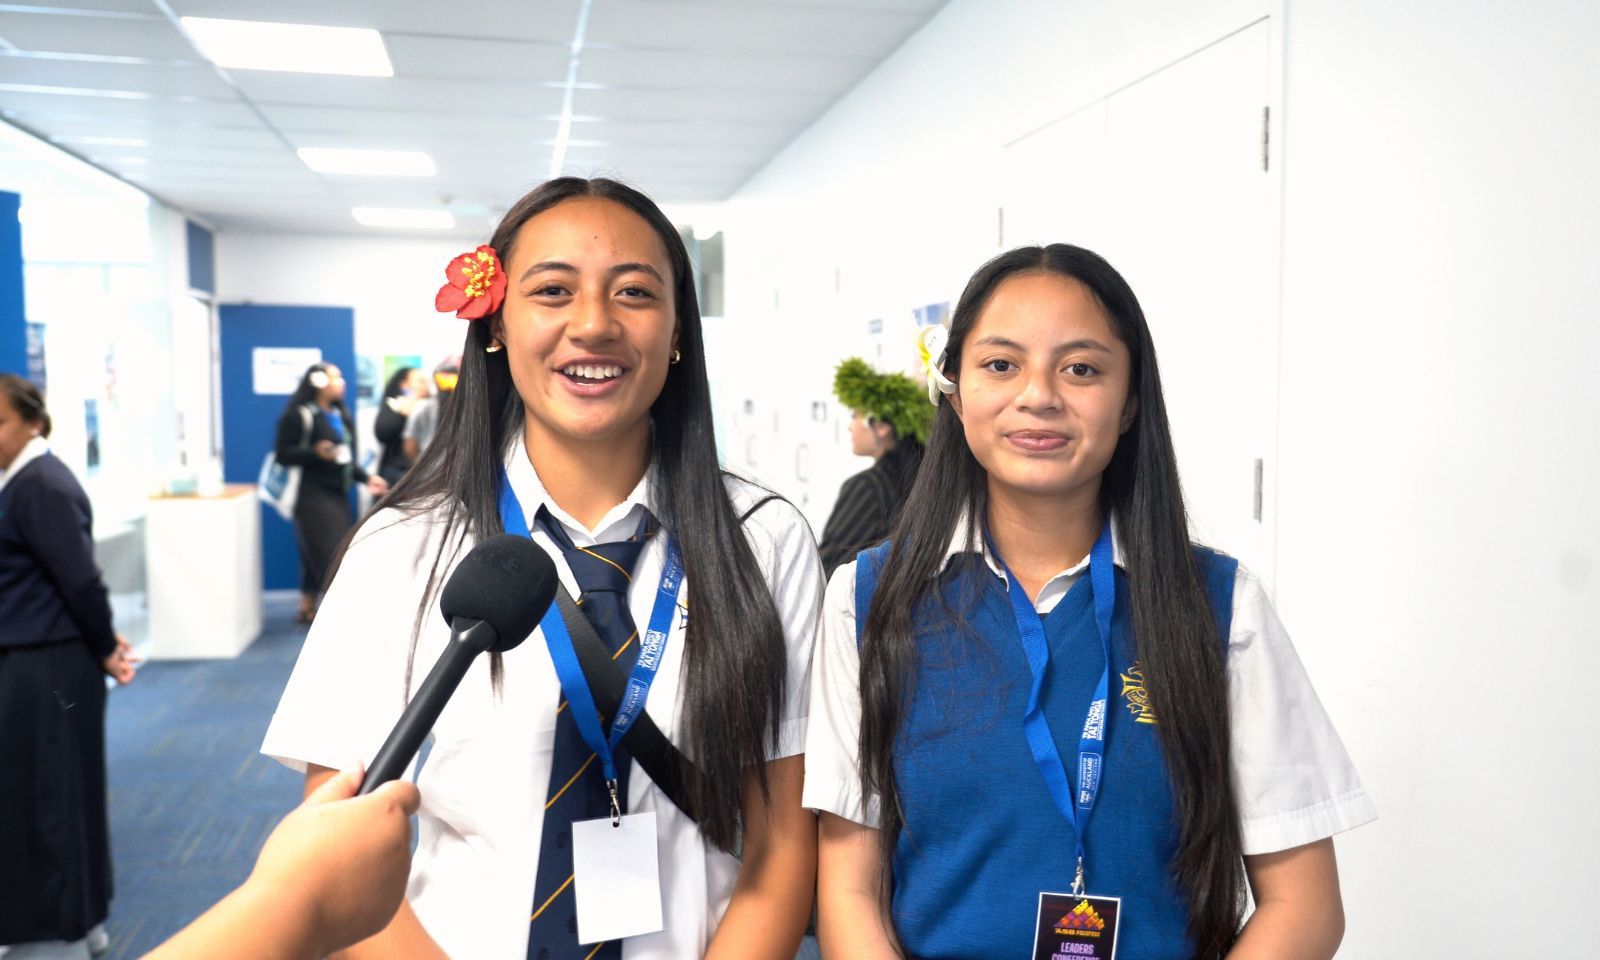 Marcellin College student leaders Grace (left) and Vanessa. Photo/Candice Ama/PMN News